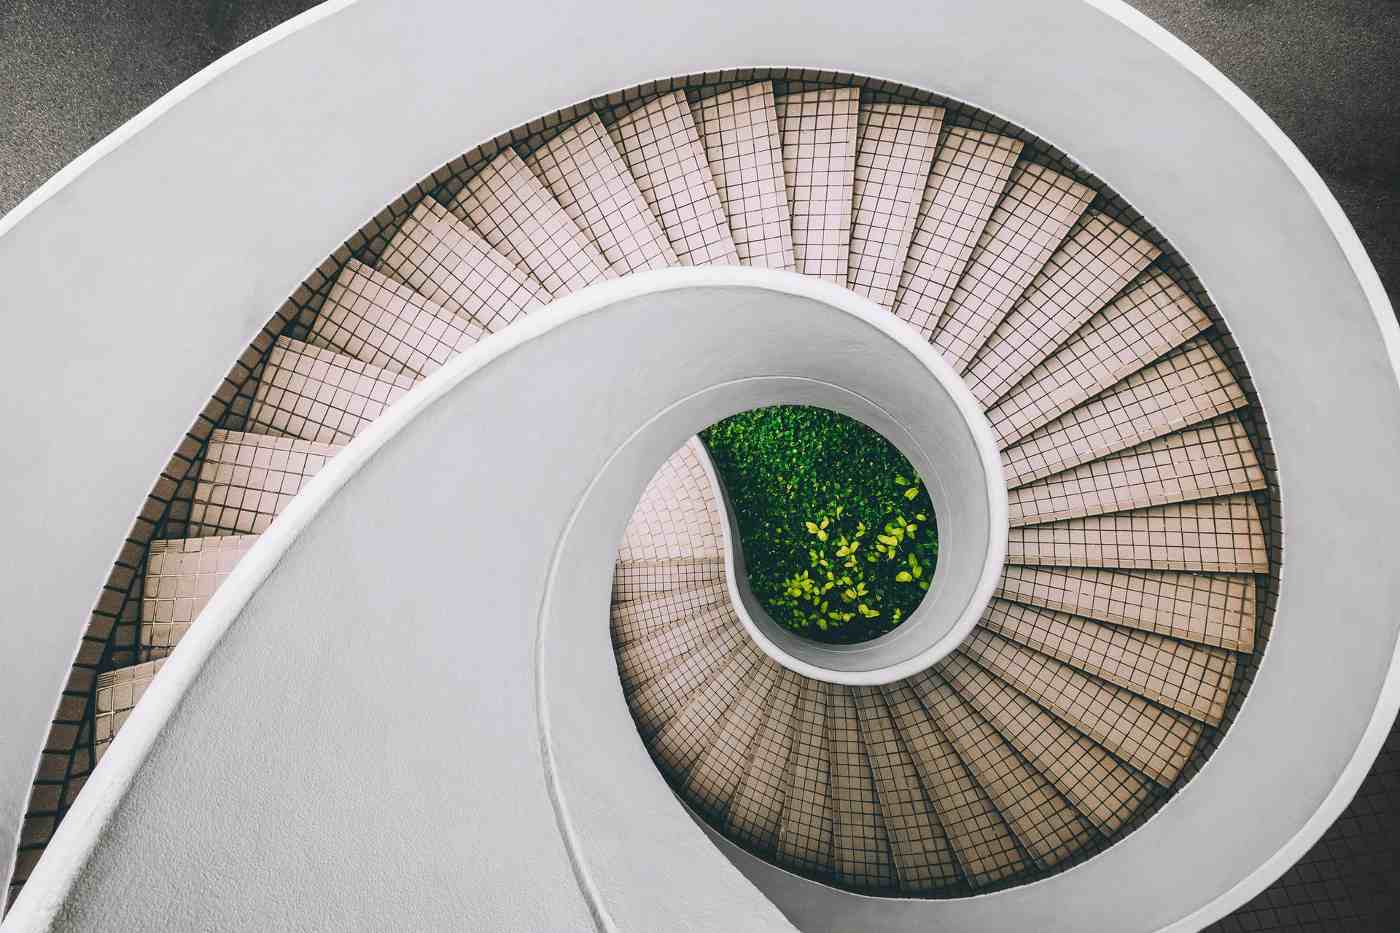 Spiral staircase with greenery at bottom - the futuristic world of living building materials